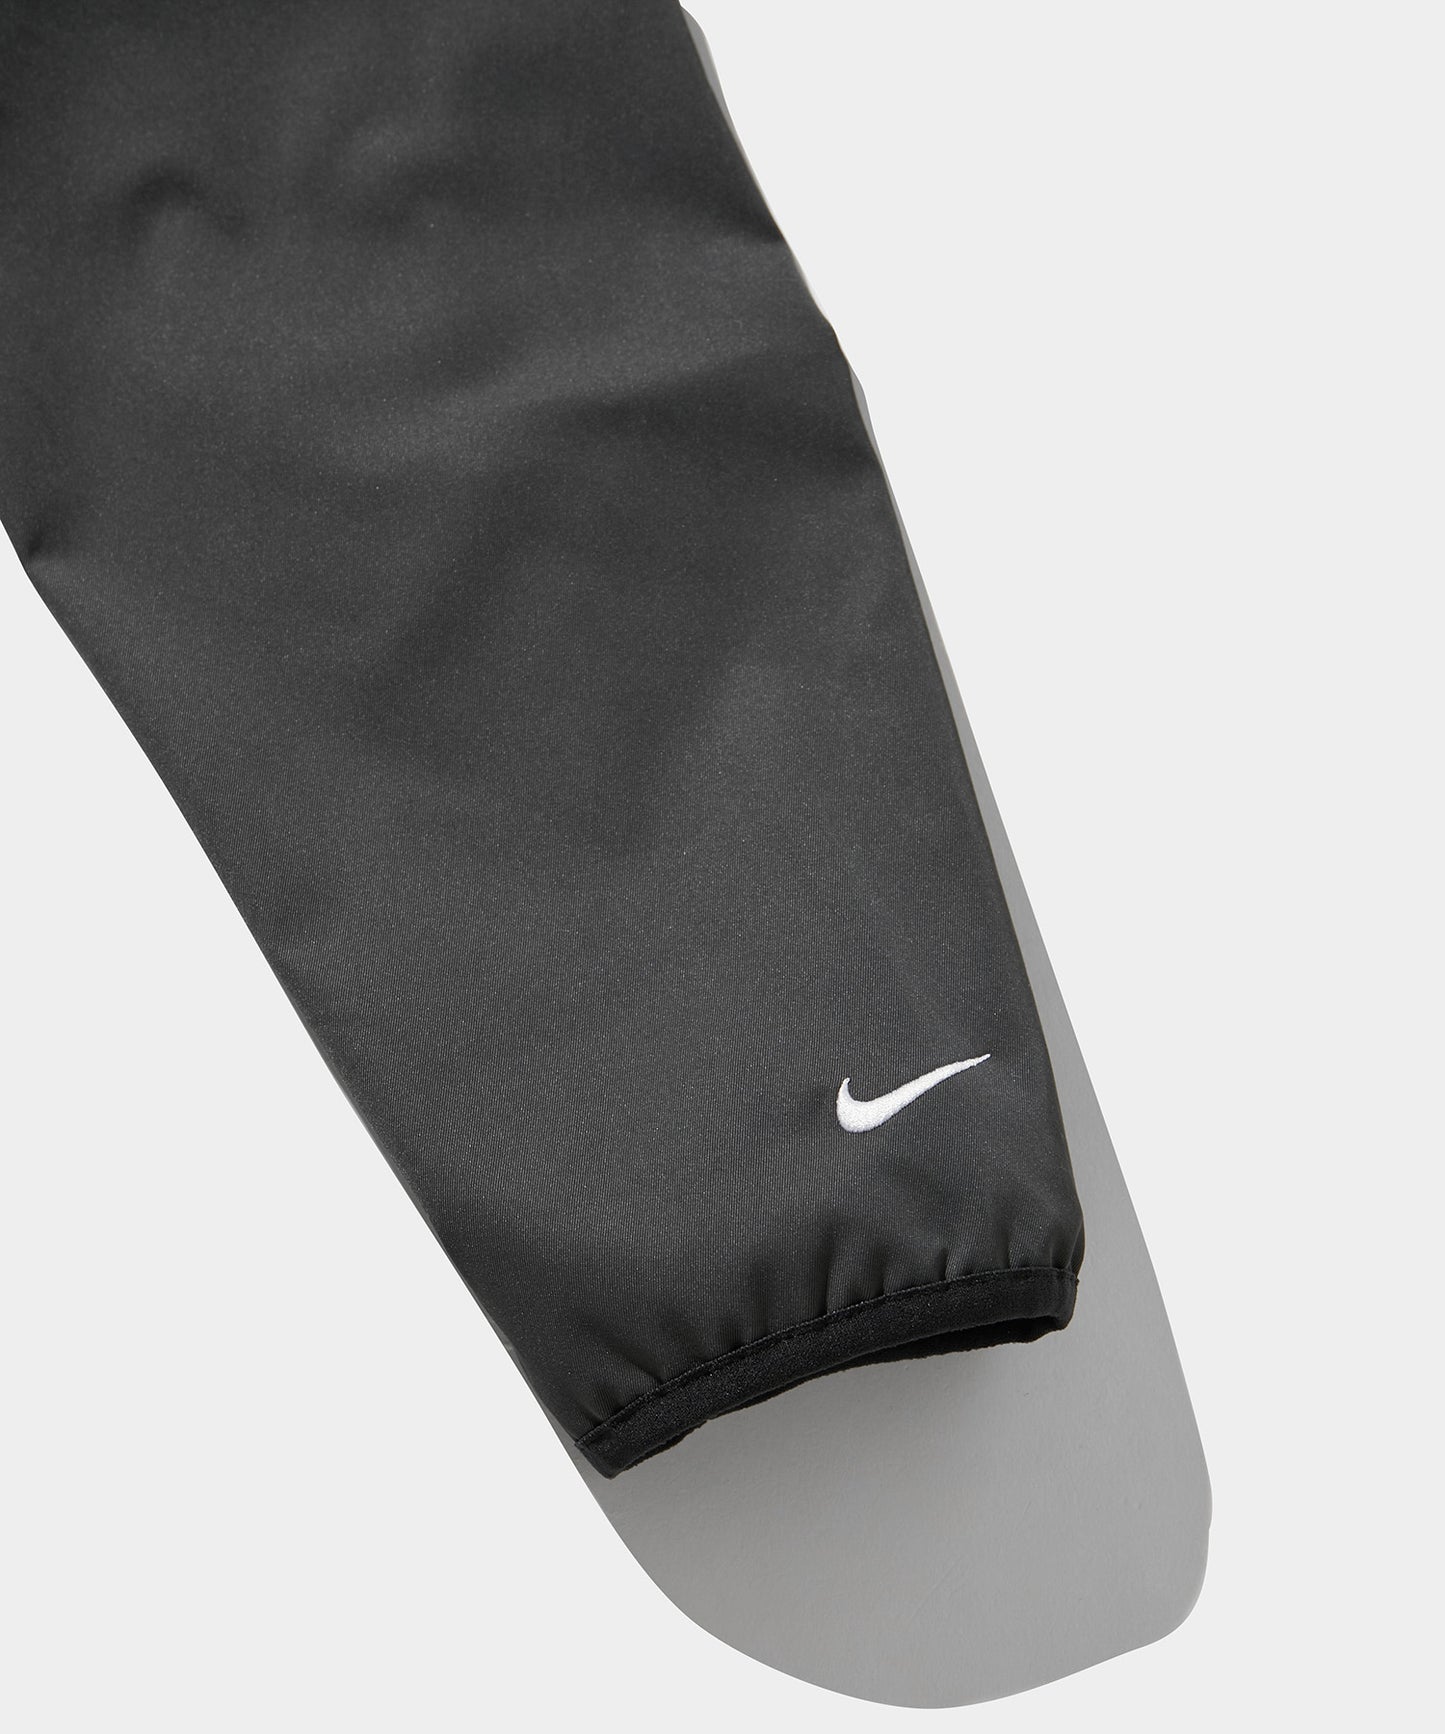 NIKE Unscripted Repel Men's Anorak Golf Jacket